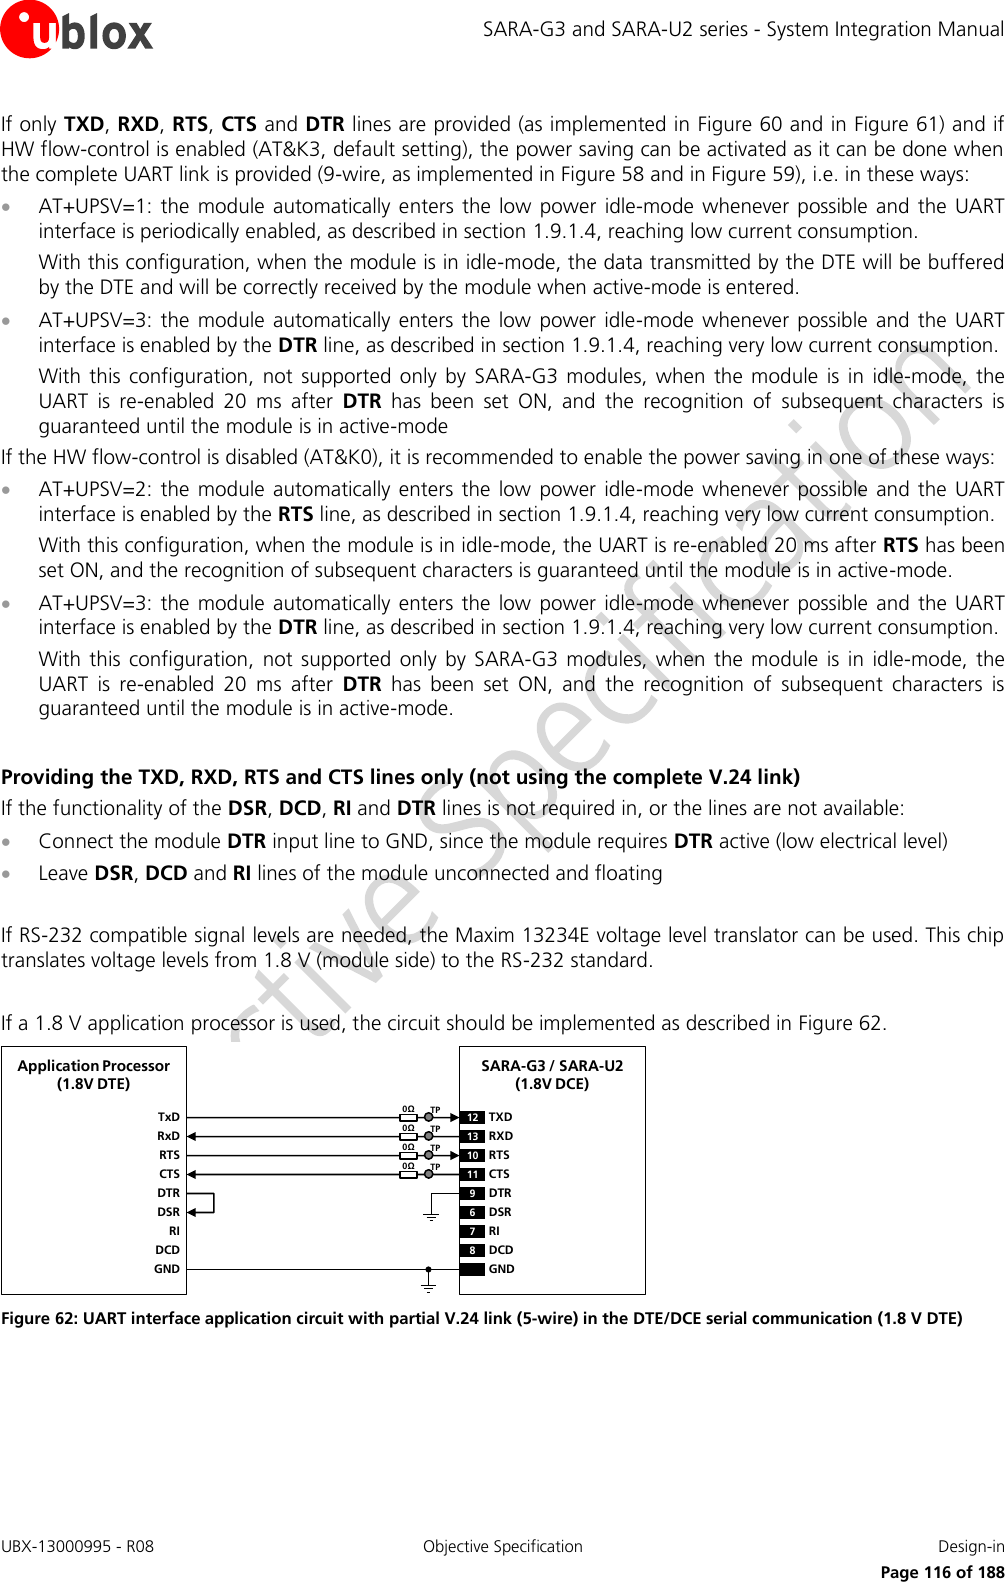 SARA-G3 and SARA-U2 series - System Integration Manual UBX-13000995 - R08  Objective Specification  Design-in     Page 116 of 188 If only TXD, RXD, RTS, CTS and DTR lines are provided (as implemented in Figure 60 and in Figure 61) and if HW flow-control is enabled (AT&amp;K3, default setting), the power saving can be activated as it can be done when the complete UART link is provided (9-wire, as implemented in Figure 58 and in Figure 59), i.e. in these ways:  AT+UPSV=1:  the module  automatically  enters the  low  power idle-mode  whenever  possible  and the  UART interface is periodically enabled, as described in section 1.9.1.4, reaching low current consumption. With this configuration, when the module is in idle-mode, the data transmitted by the DTE will be buffered by the DTE and will be correctly received by the module when active-mode is entered.  AT+UPSV=3:  the module  automatically  enters the low power idle-mode  whenever  possible and  the  UART interface is enabled by the DTR line, as described in section 1.9.1.4, reaching very low current consumption. With this  configuration,  not supported  only  by  SARA-G3  modules, when  the module  is in  idle-mode, the UART  is  re-enabled  20  ms  after  DTR  has  been  set  ON,  and  the  recognition  of  subsequent  characters  is guaranteed until the module is in active-mode If the HW flow-control is disabled (AT&amp;K0), it is recommended to enable the power saving in one of these ways:  AT+UPSV=2:  the module  automatically  enters the low power idle-mode  whenever  possible and the  UART interface is enabled by the RTS line, as described in section 1.9.1.4, reaching very low current consumption. With this configuration, when the module is in idle-mode, the UART is re-enabled 20 ms after RTS has been set ON, and the recognition of subsequent characters is guaranteed until the module is in active-mode.  AT+UPSV=3:  the module  automatically  enters the low power idle-mode  whenever  possible and the  UART interface is enabled by the DTR line, as described in section 1.9.1.4, reaching very low current consumption. With this  configuration,  not supported  only  by SARA-G3  modules,  when the  module  is  in  idle-mode,  the UART  is  re-enabled  20  ms  after  DTR  has  been  set  ON,  and  the  recognition  of  subsequent  characters  is guaranteed until the module is in active-mode.  Providing the TXD, RXD, RTS and CTS lines only (not using the complete V.24 link) If the functionality of the DSR, DCD, RI and DTR lines is not required in, or the lines are not available:  Connect the module DTR input line to GND, since the module requires DTR active (low electrical level)  Leave DSR, DCD and RI lines of the module unconnected and floating  If RS-232 compatible signal levels are needed, the Maxim 13234E voltage level translator can be used. This chip translates voltage levels from 1.8 V (module side) to the RS-232 standard.  If a 1.8 V application processor is used, the circuit should be implemented as described in Figure 62. TxDApplication Processor(1.8V DTE)RxDRTSCTSDTRDSRRIDCDGNDSARA-G3 / SARA-U2(1.8V DCE)12 TXD9DTR13 RXD10 RTS11 CTS6DSR7RI8DCDGND0ΩTP0ΩTP0ΩTP0ΩTP Figure 62: UART interface application circuit with partial V.24 link (5-wire) in the DTE/DCE serial communication (1.8 V DTE) 